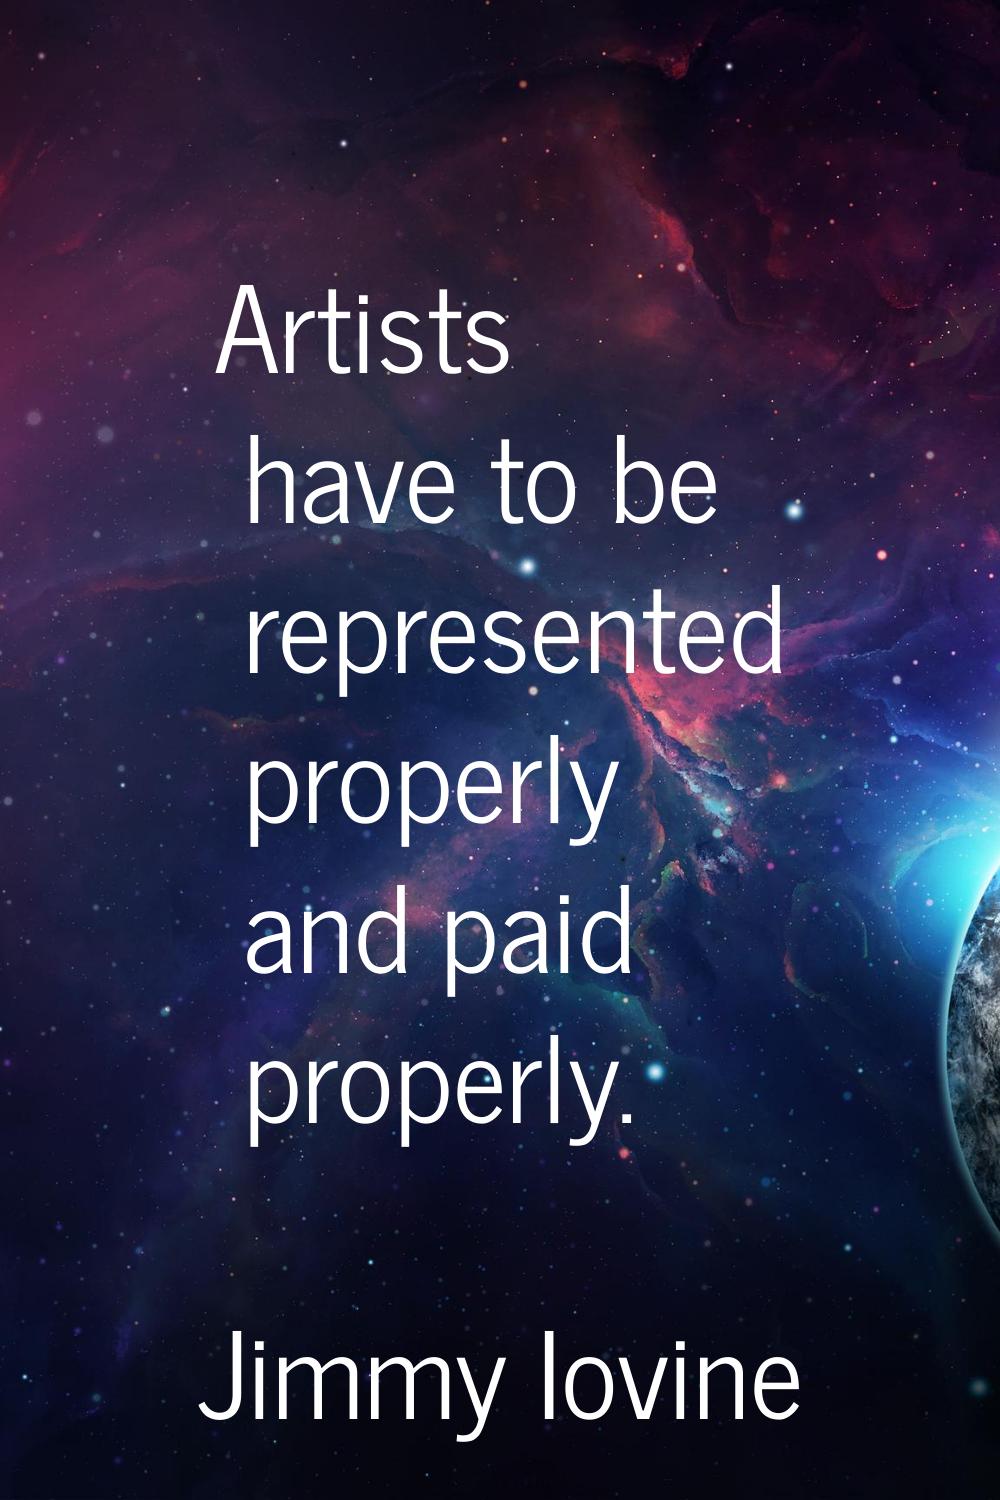 Artists have to be represented properly and paid properly.